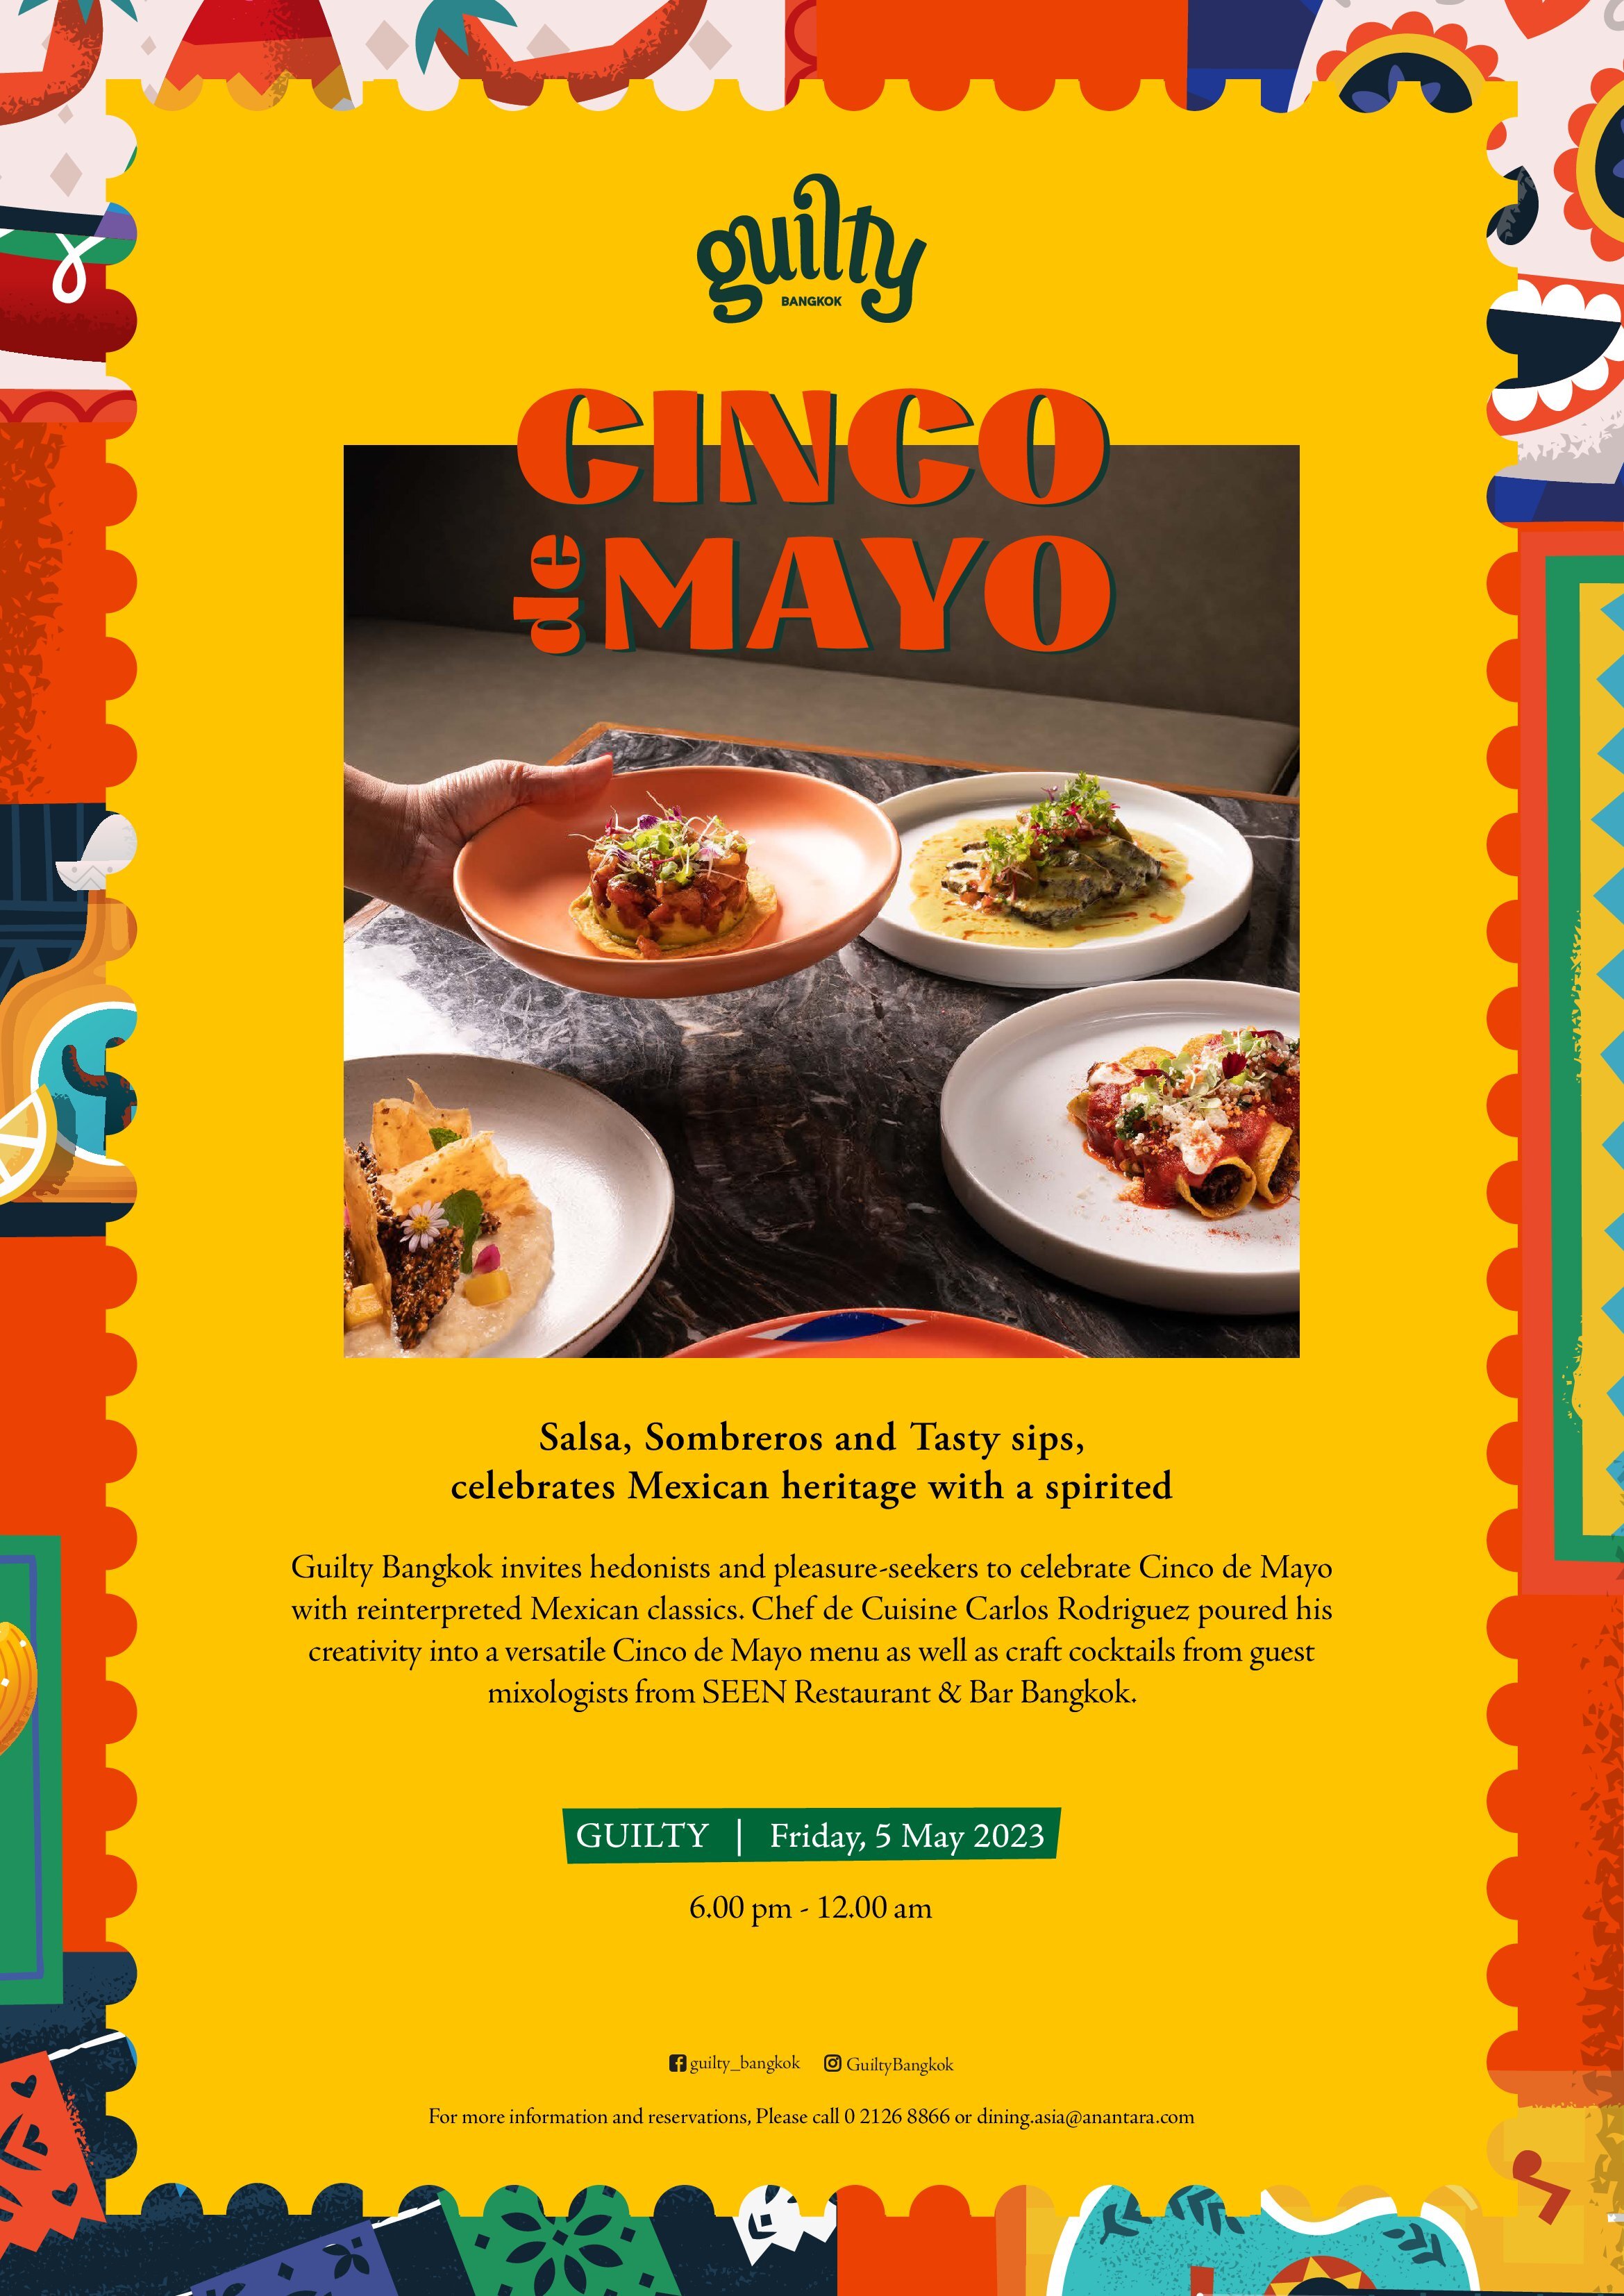 Salsa, Sombreros and Tasty Sips: GUILTY at Anantara Siam Celebrates Mexican Heritage with a Spirited Cinco de Mayo Fiesta